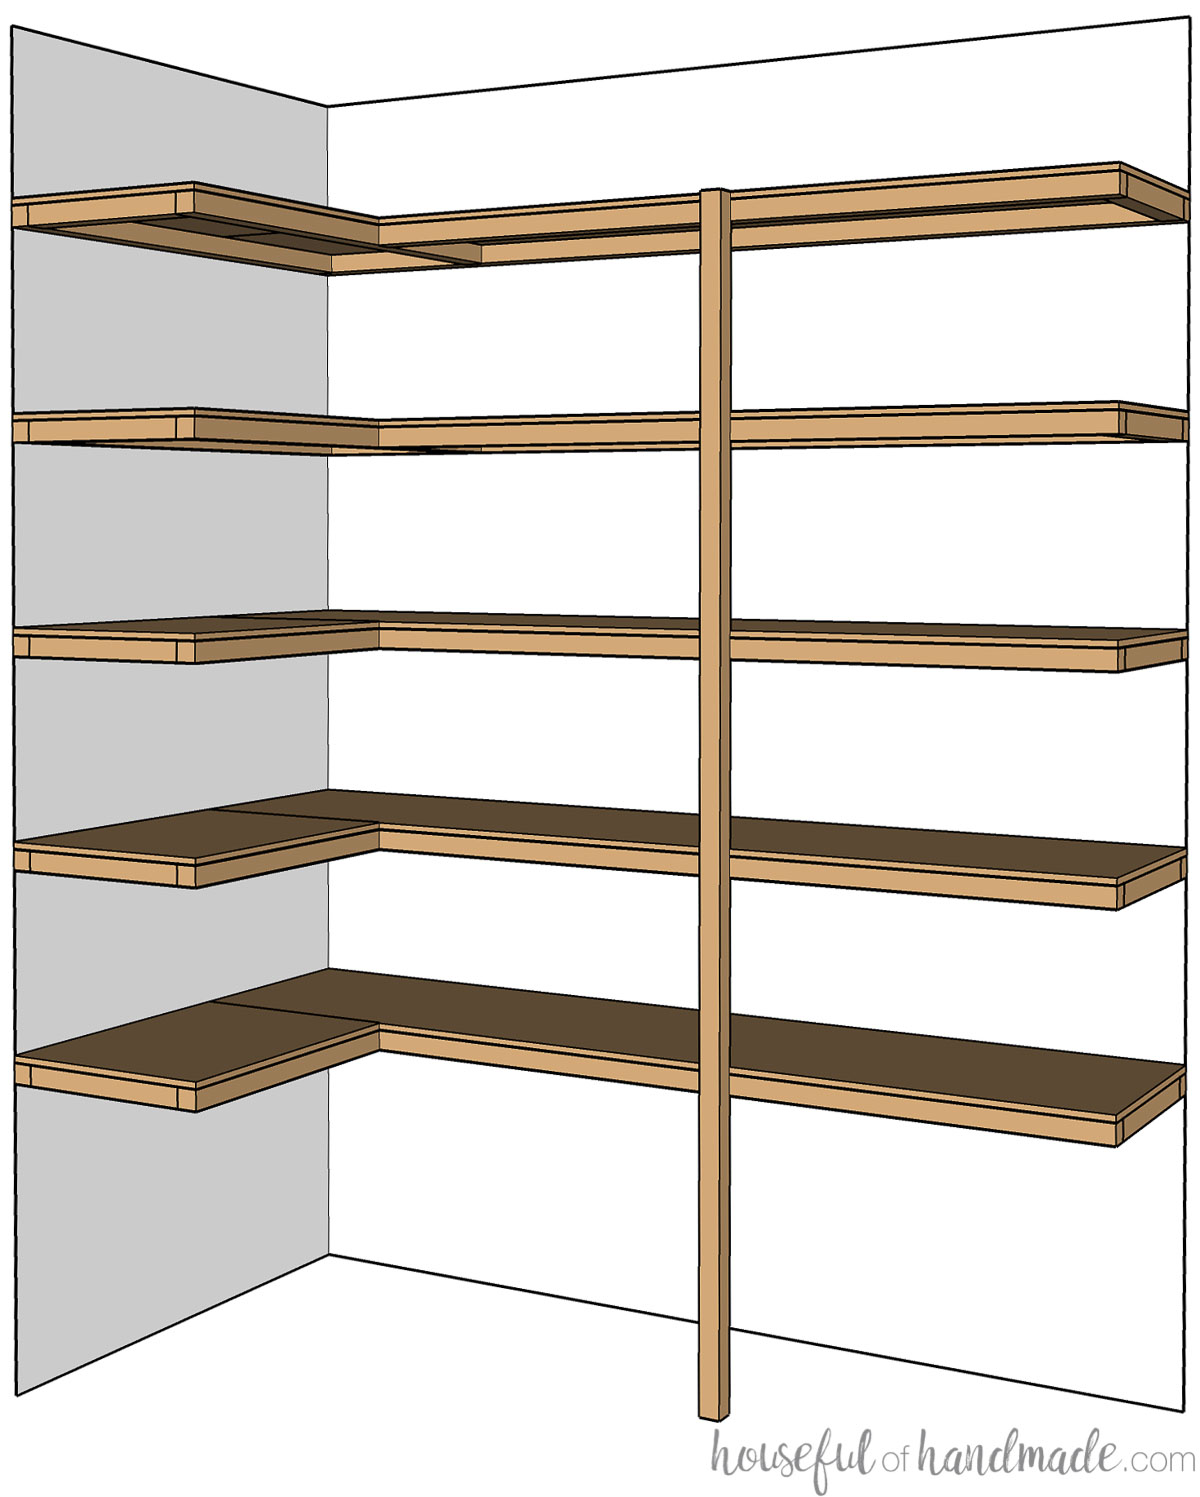 3D sketch of storage shelves with a 2x2 board for support in the front. 